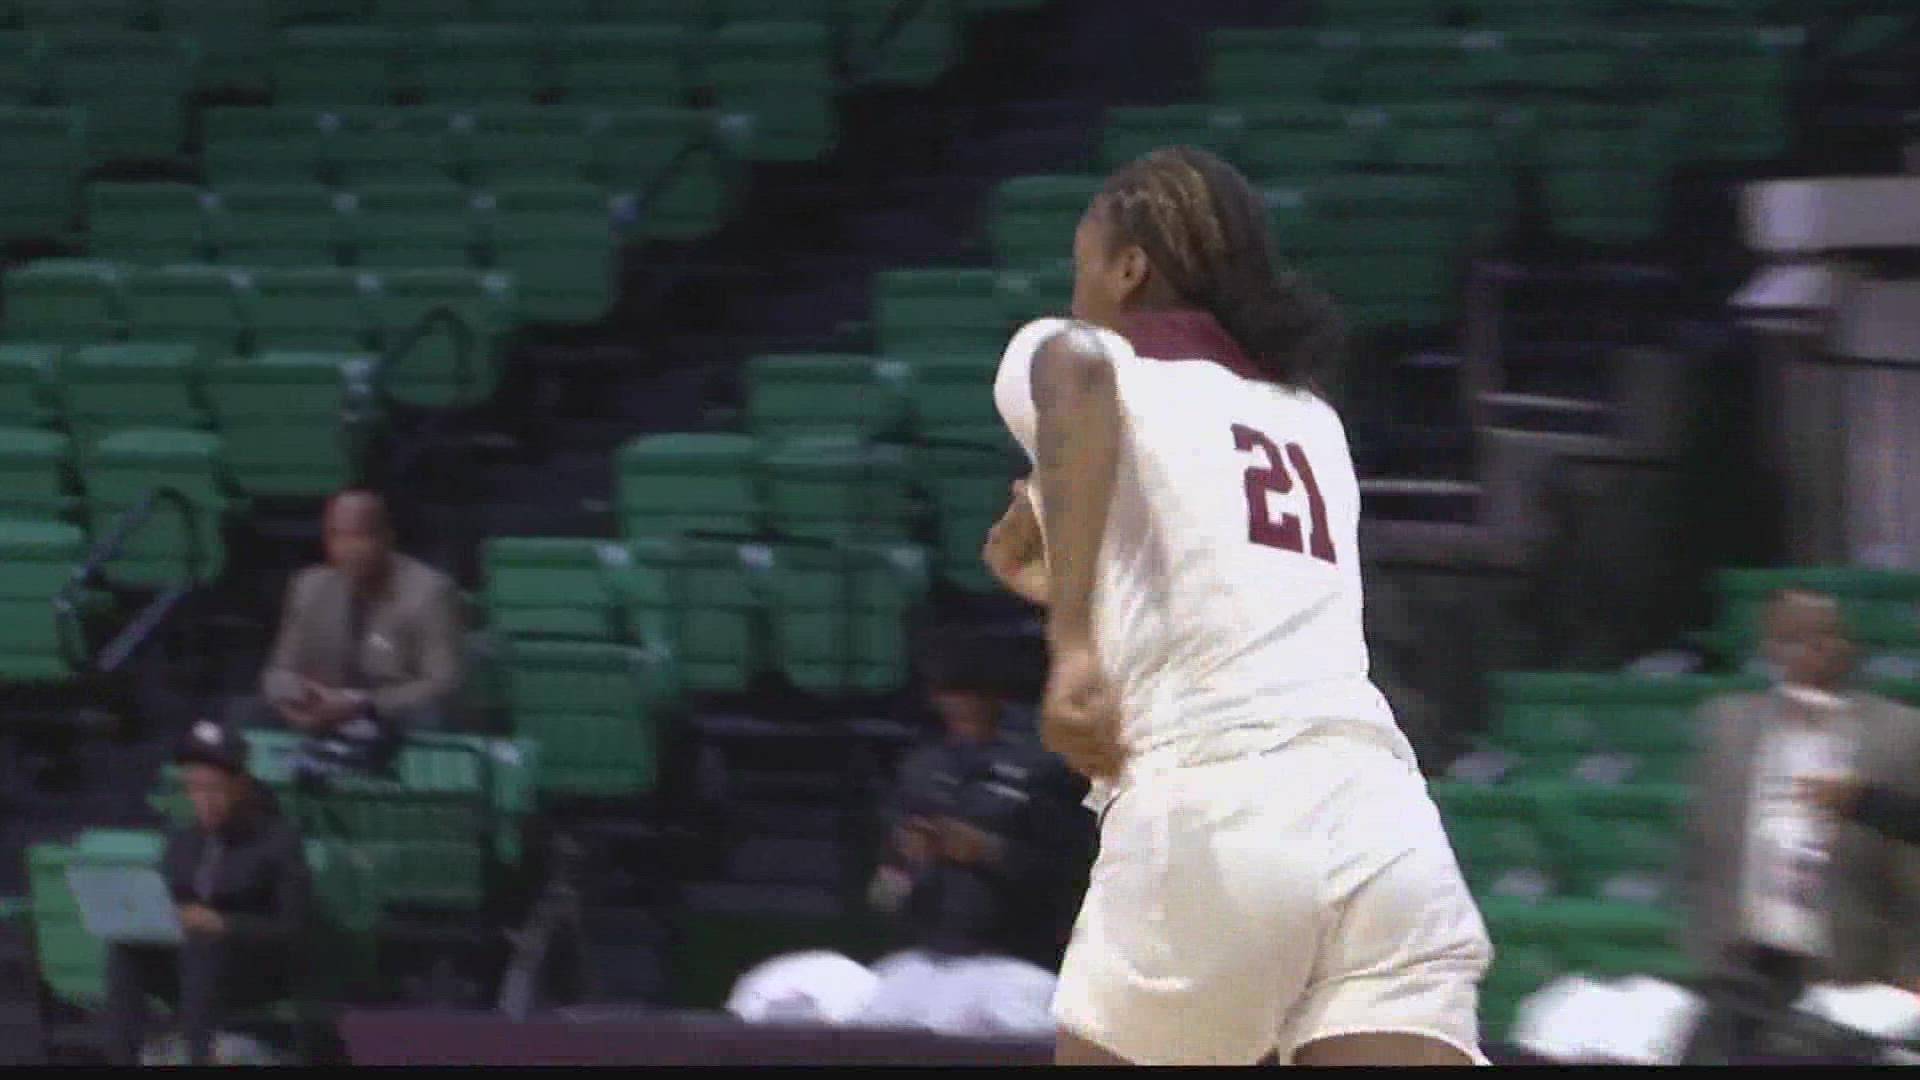 Alabama A&M women's basketball standout Dariauna Lewis has announced on social media her commitment to play for the Orange.